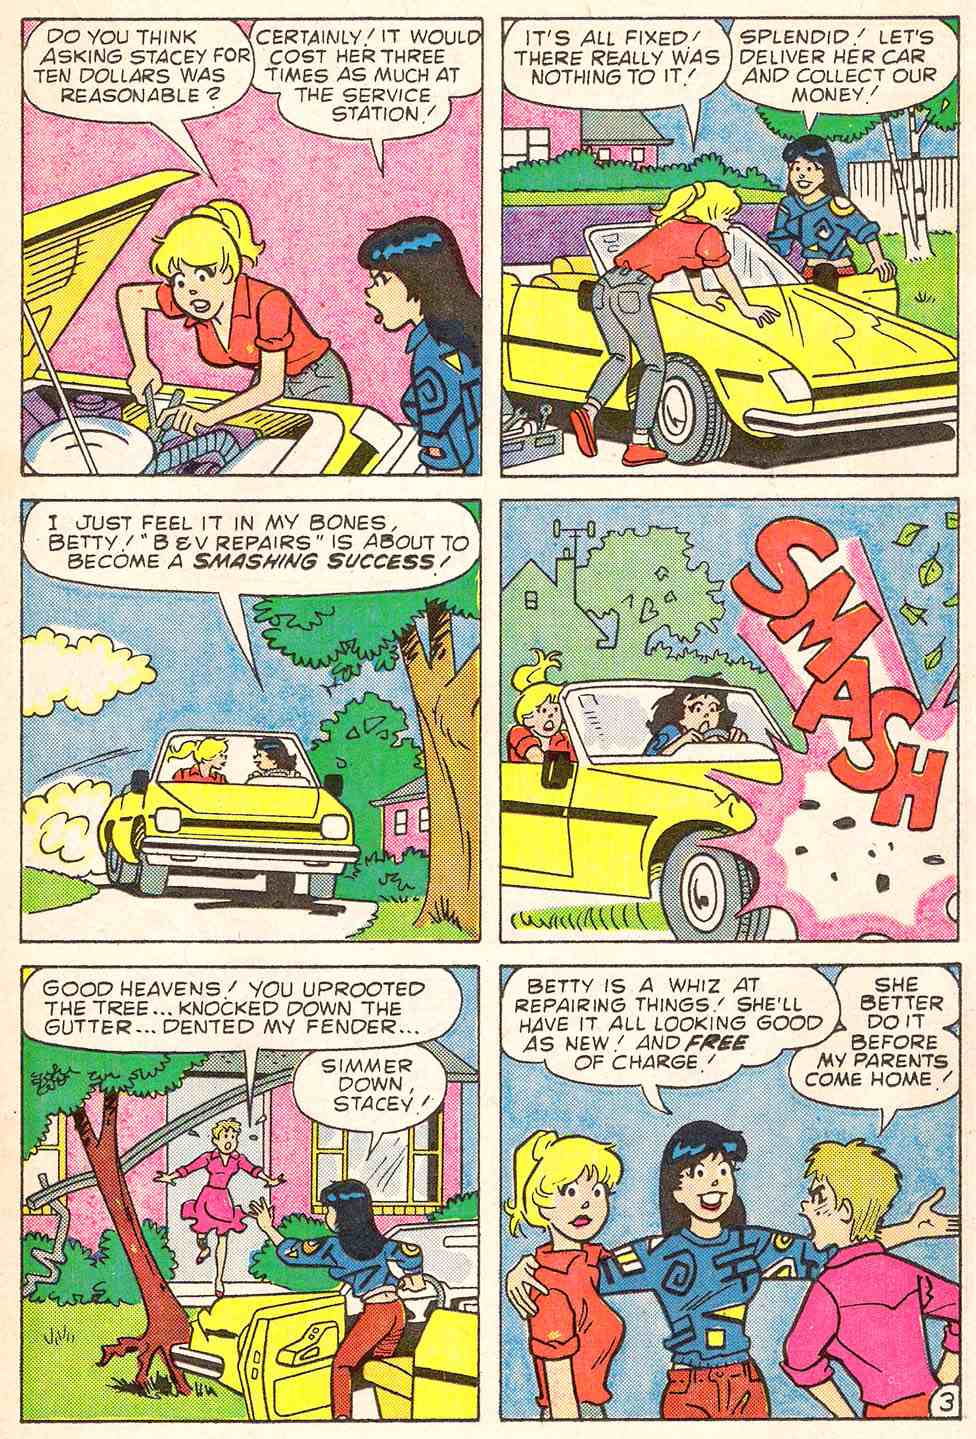 Read online Archie's Girls Betty and Veronica comic -  Issue #344 - 15